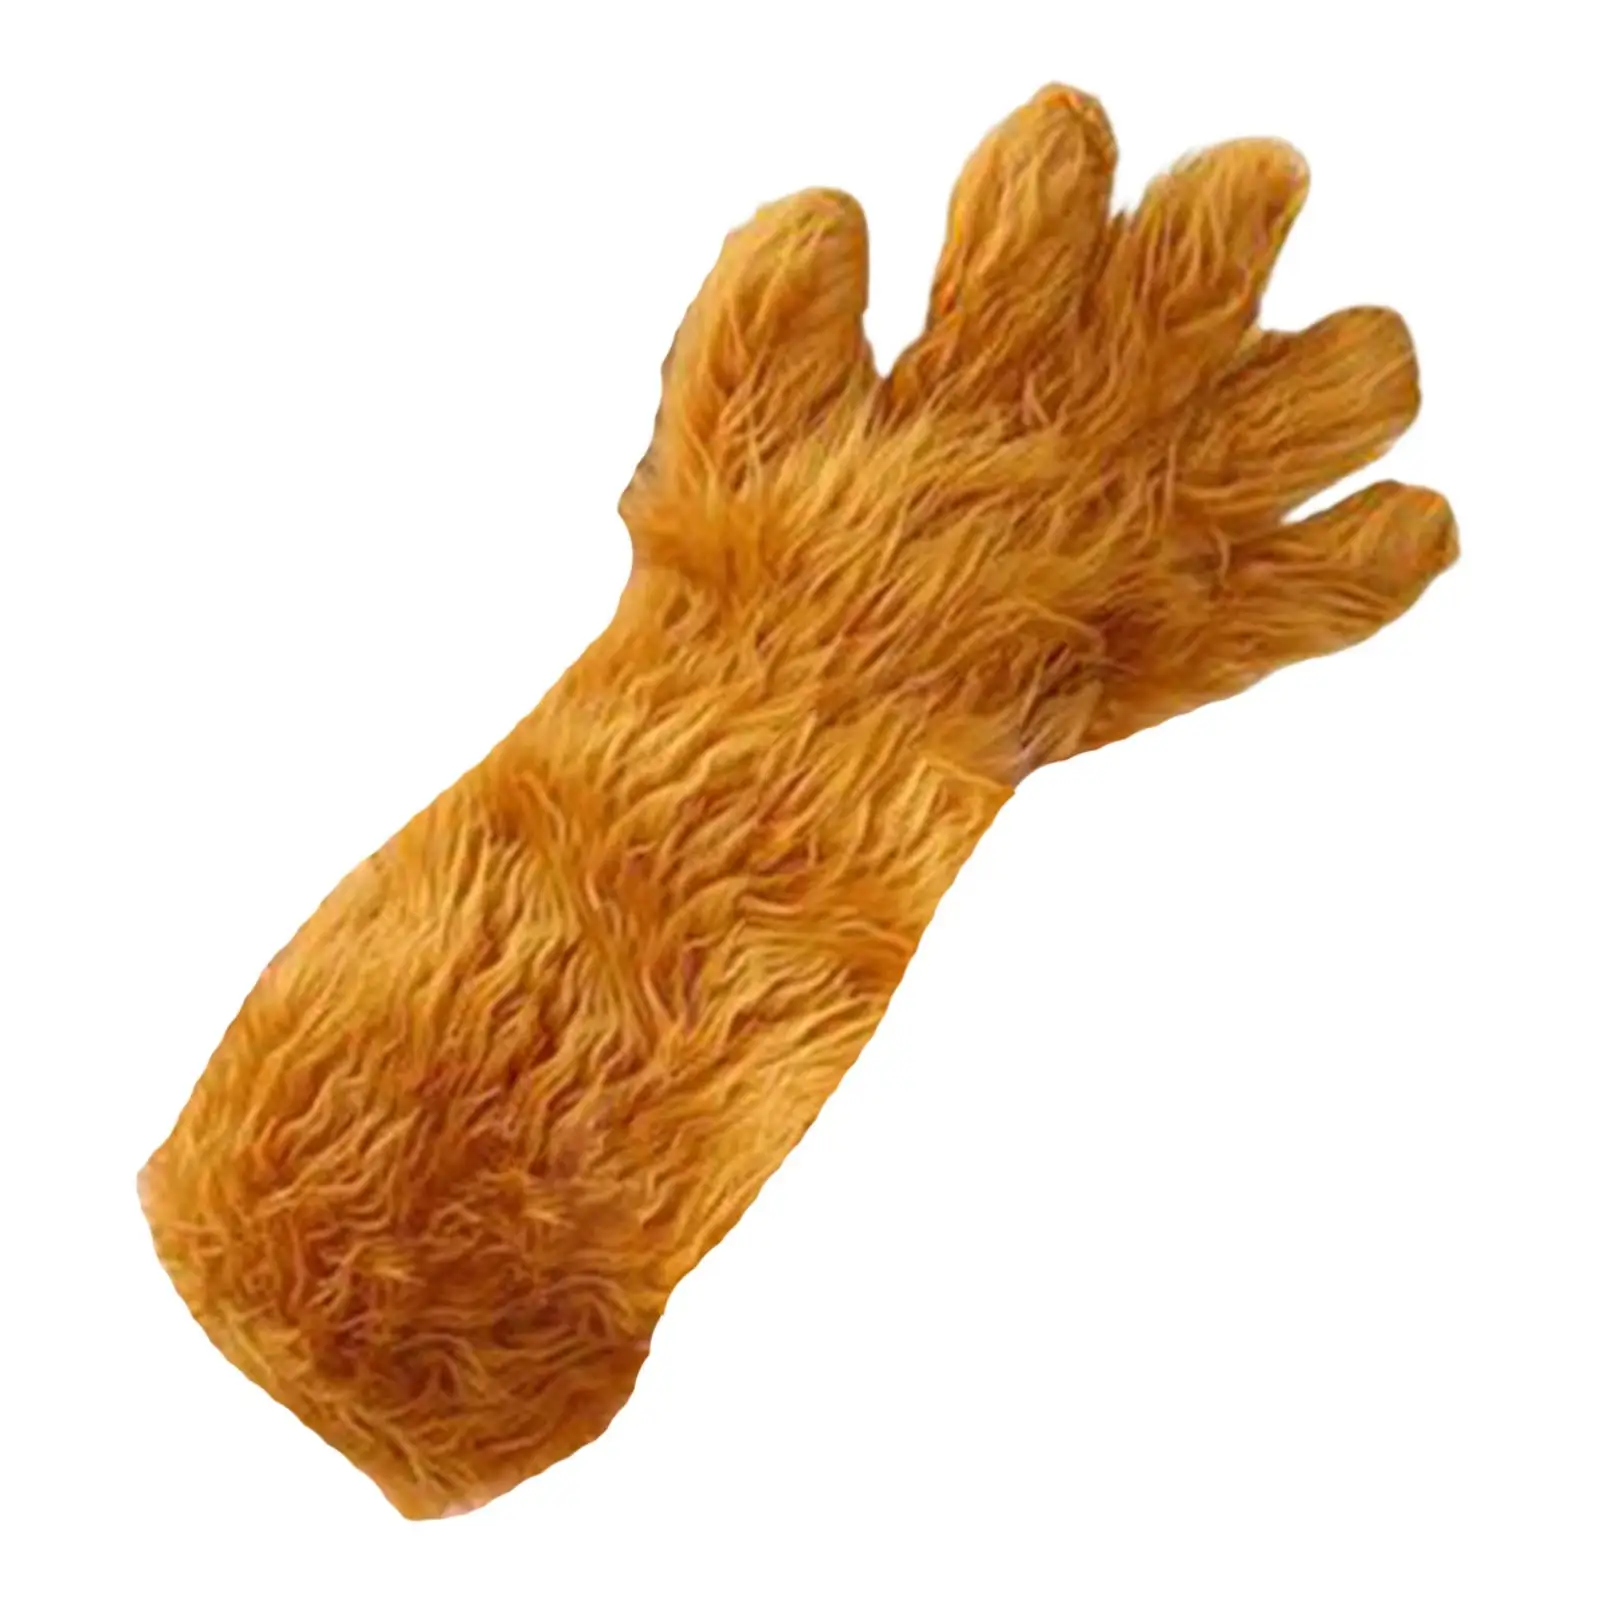 Paw Gloves Costume Dress Cosplay Decoration for Carnival Festival Role Play Birthday